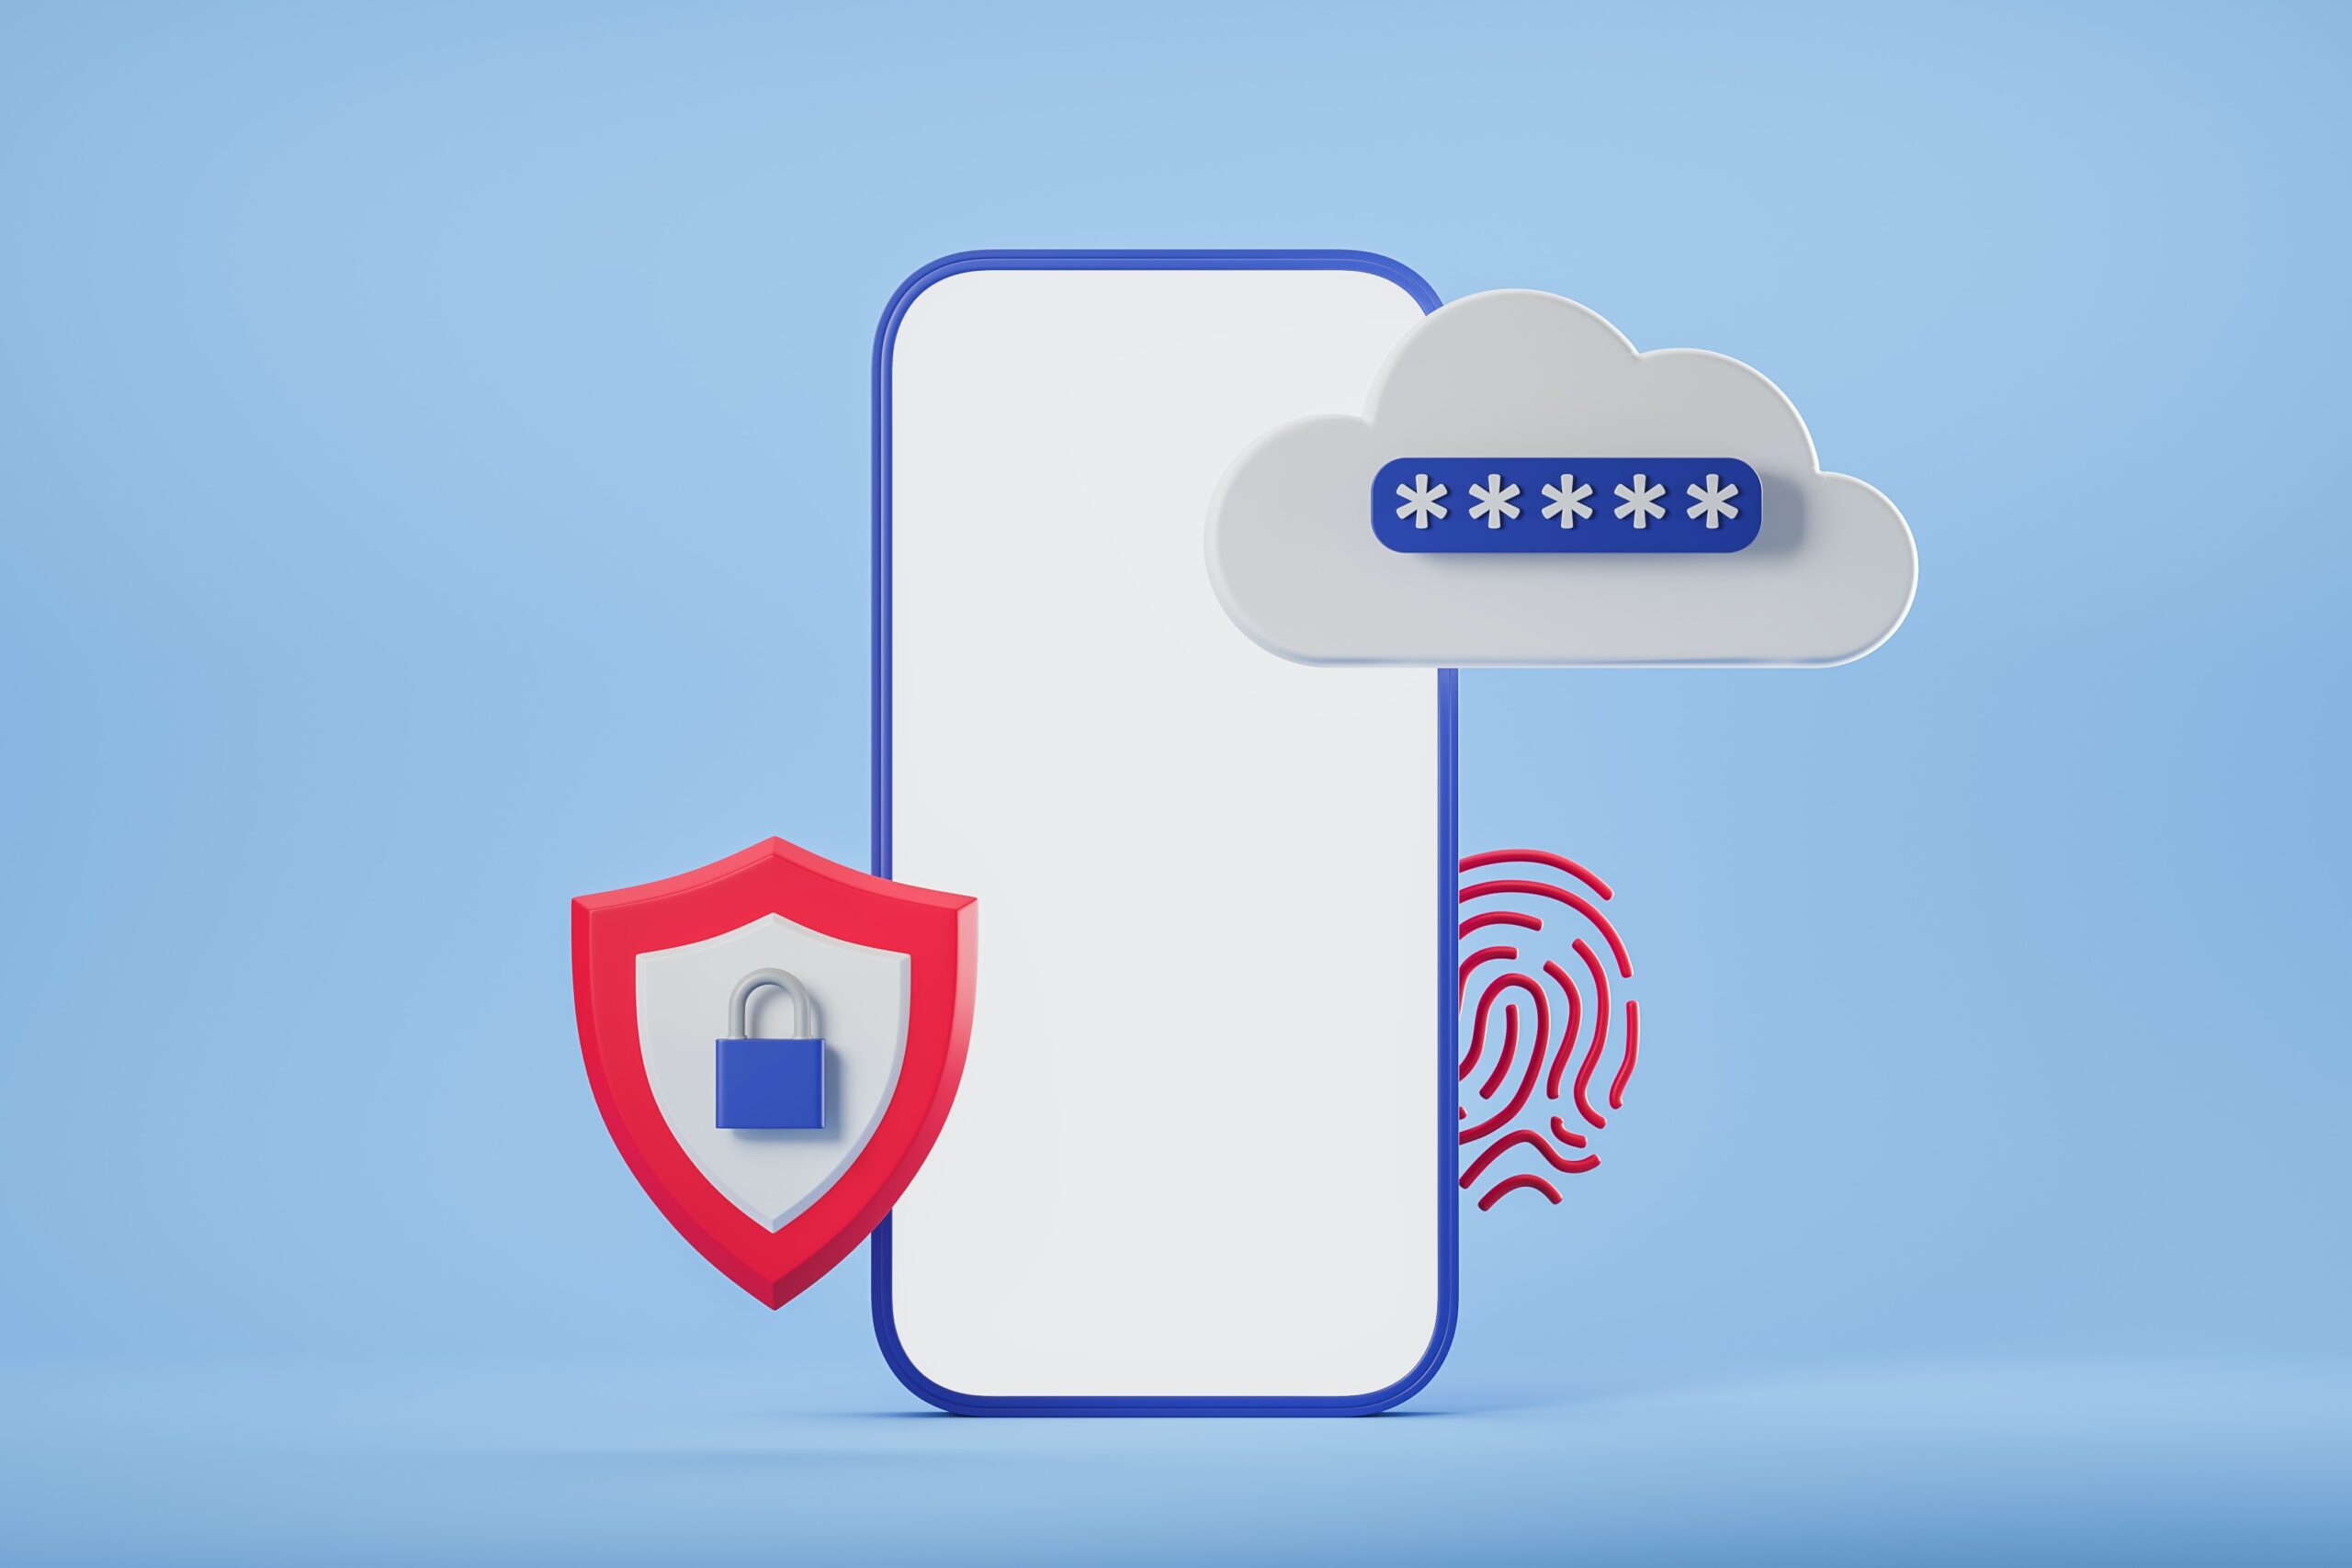 A cloud with a lock and a padlock on a phone, illustrating the importance of privacy and security in online personal information protection.